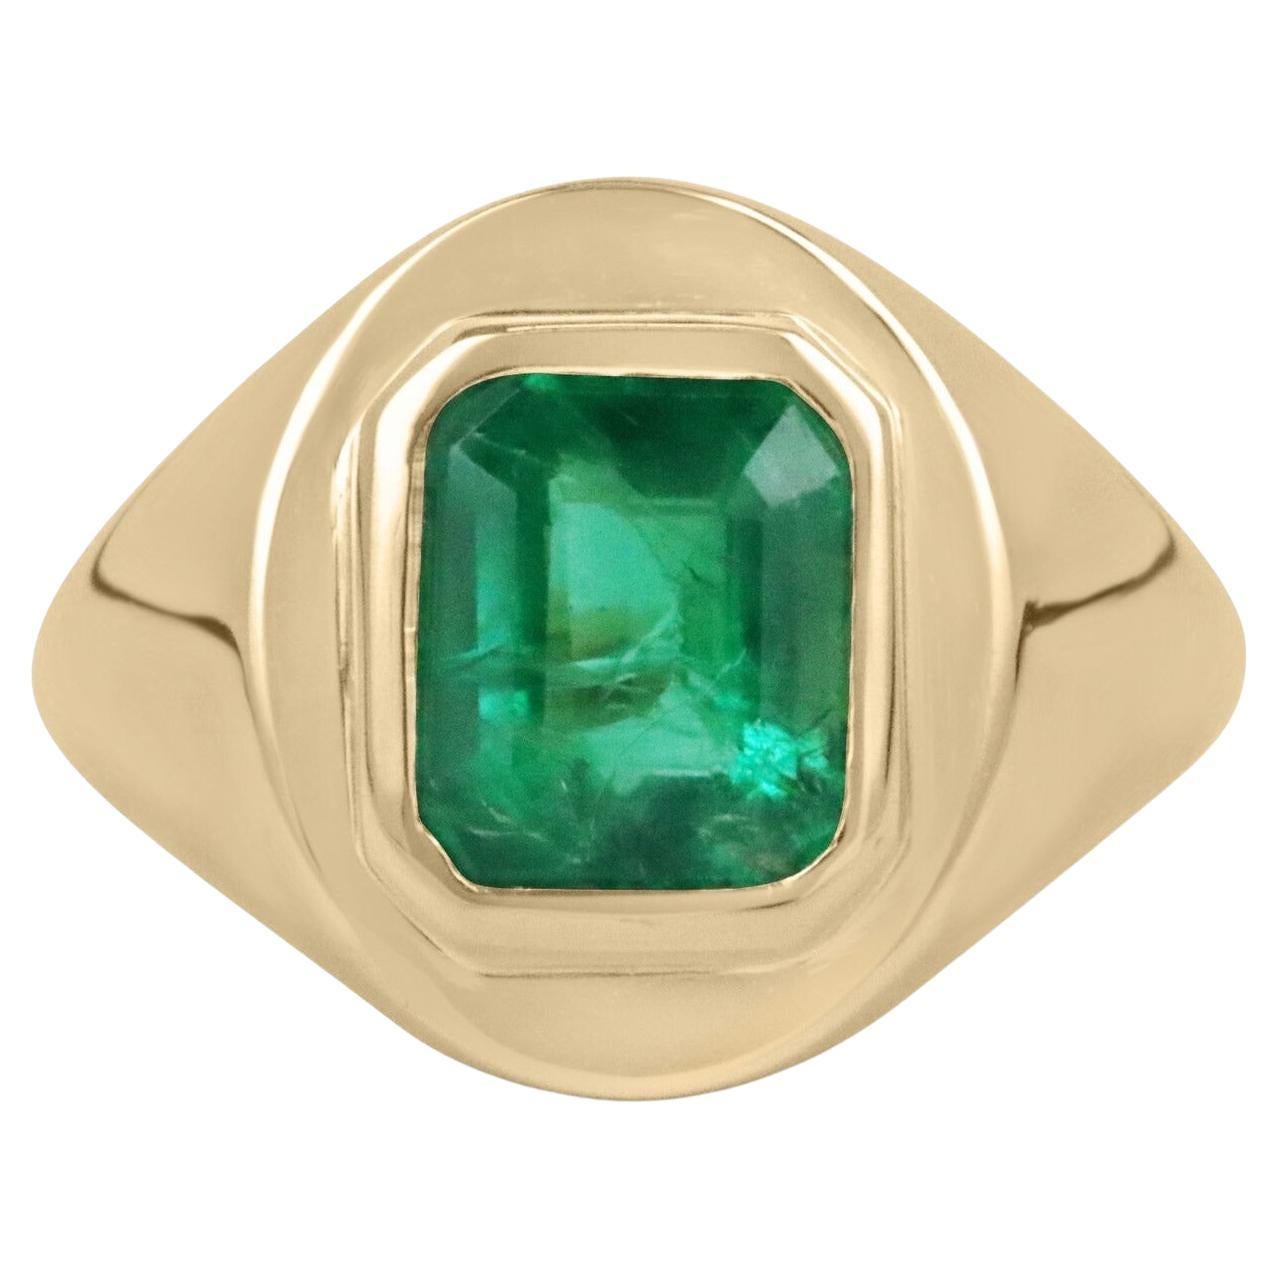 2.78 Carat AAA Top Quality Vivid Green Solid Gold Men's Signet Ring 18K